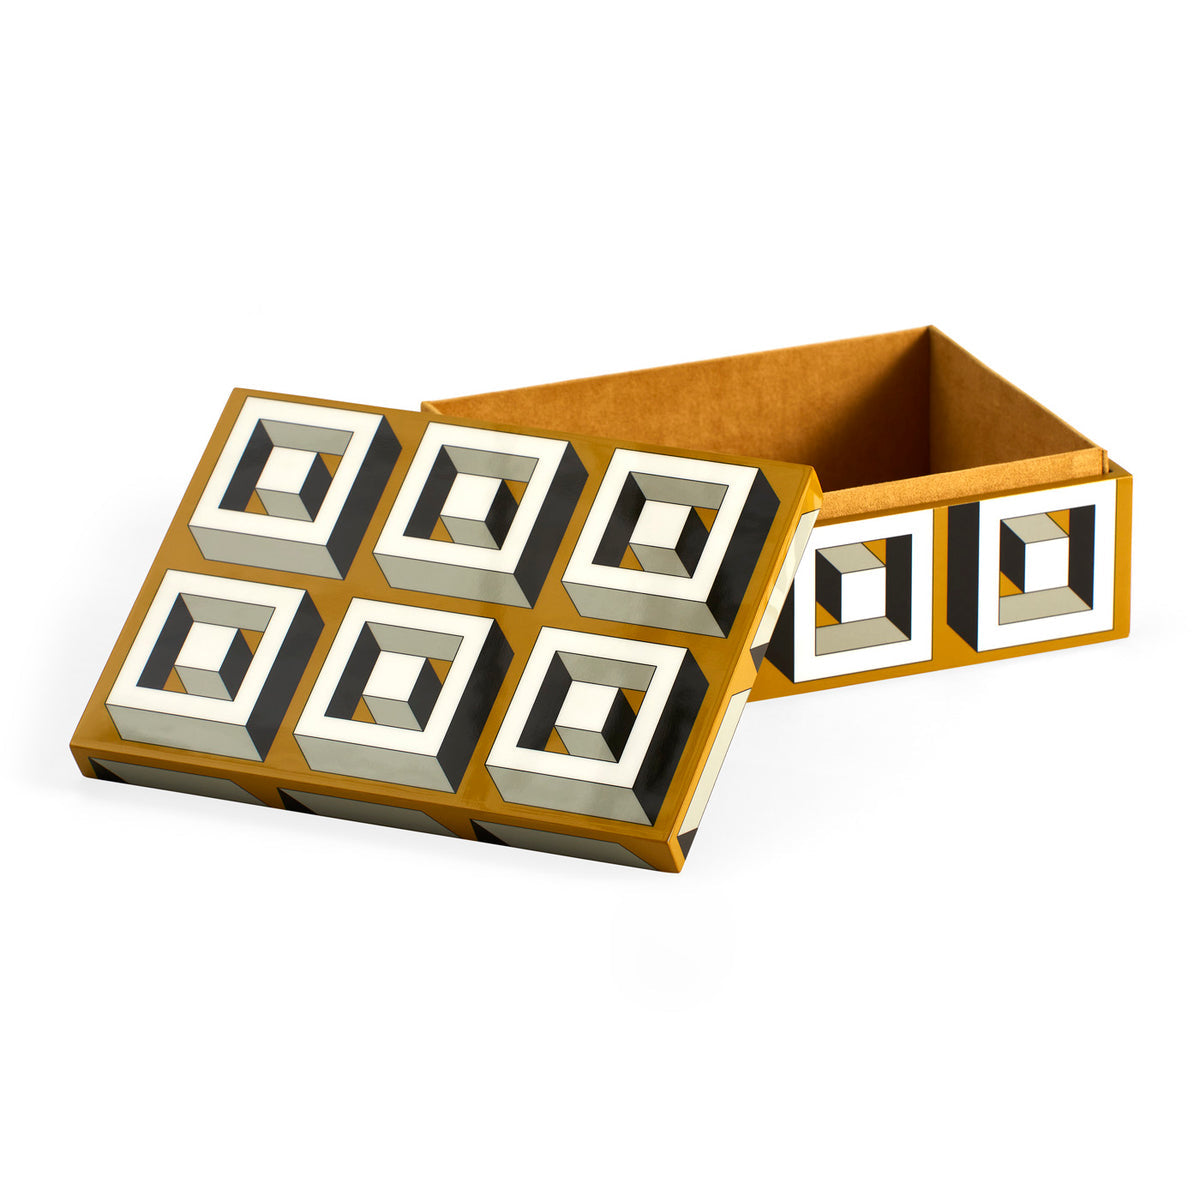 Arcade Lacquer Box by Jonathan Adler